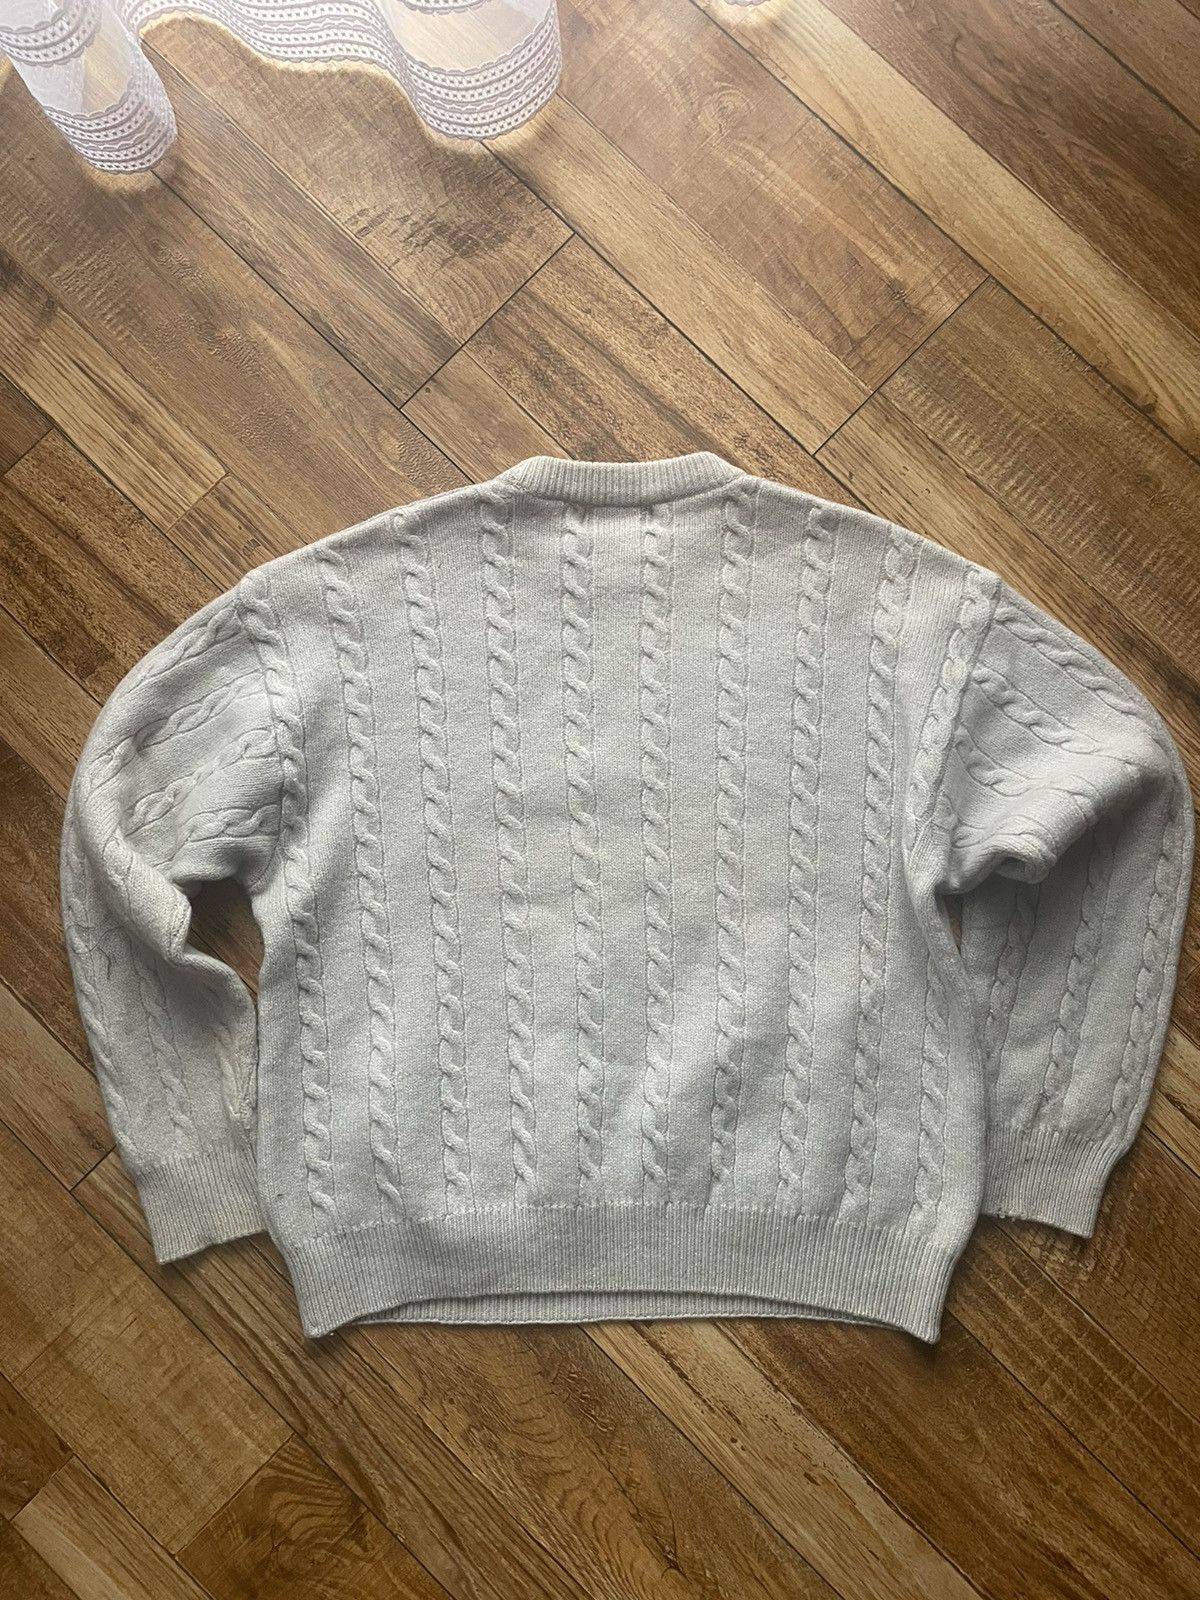 Vintage 🔥KNITTED SWEATER MADE IN ITALY, SETBALL, NEW YEAR, snow Size US M / EU 48-50 / 2 - 4 Thumbnail